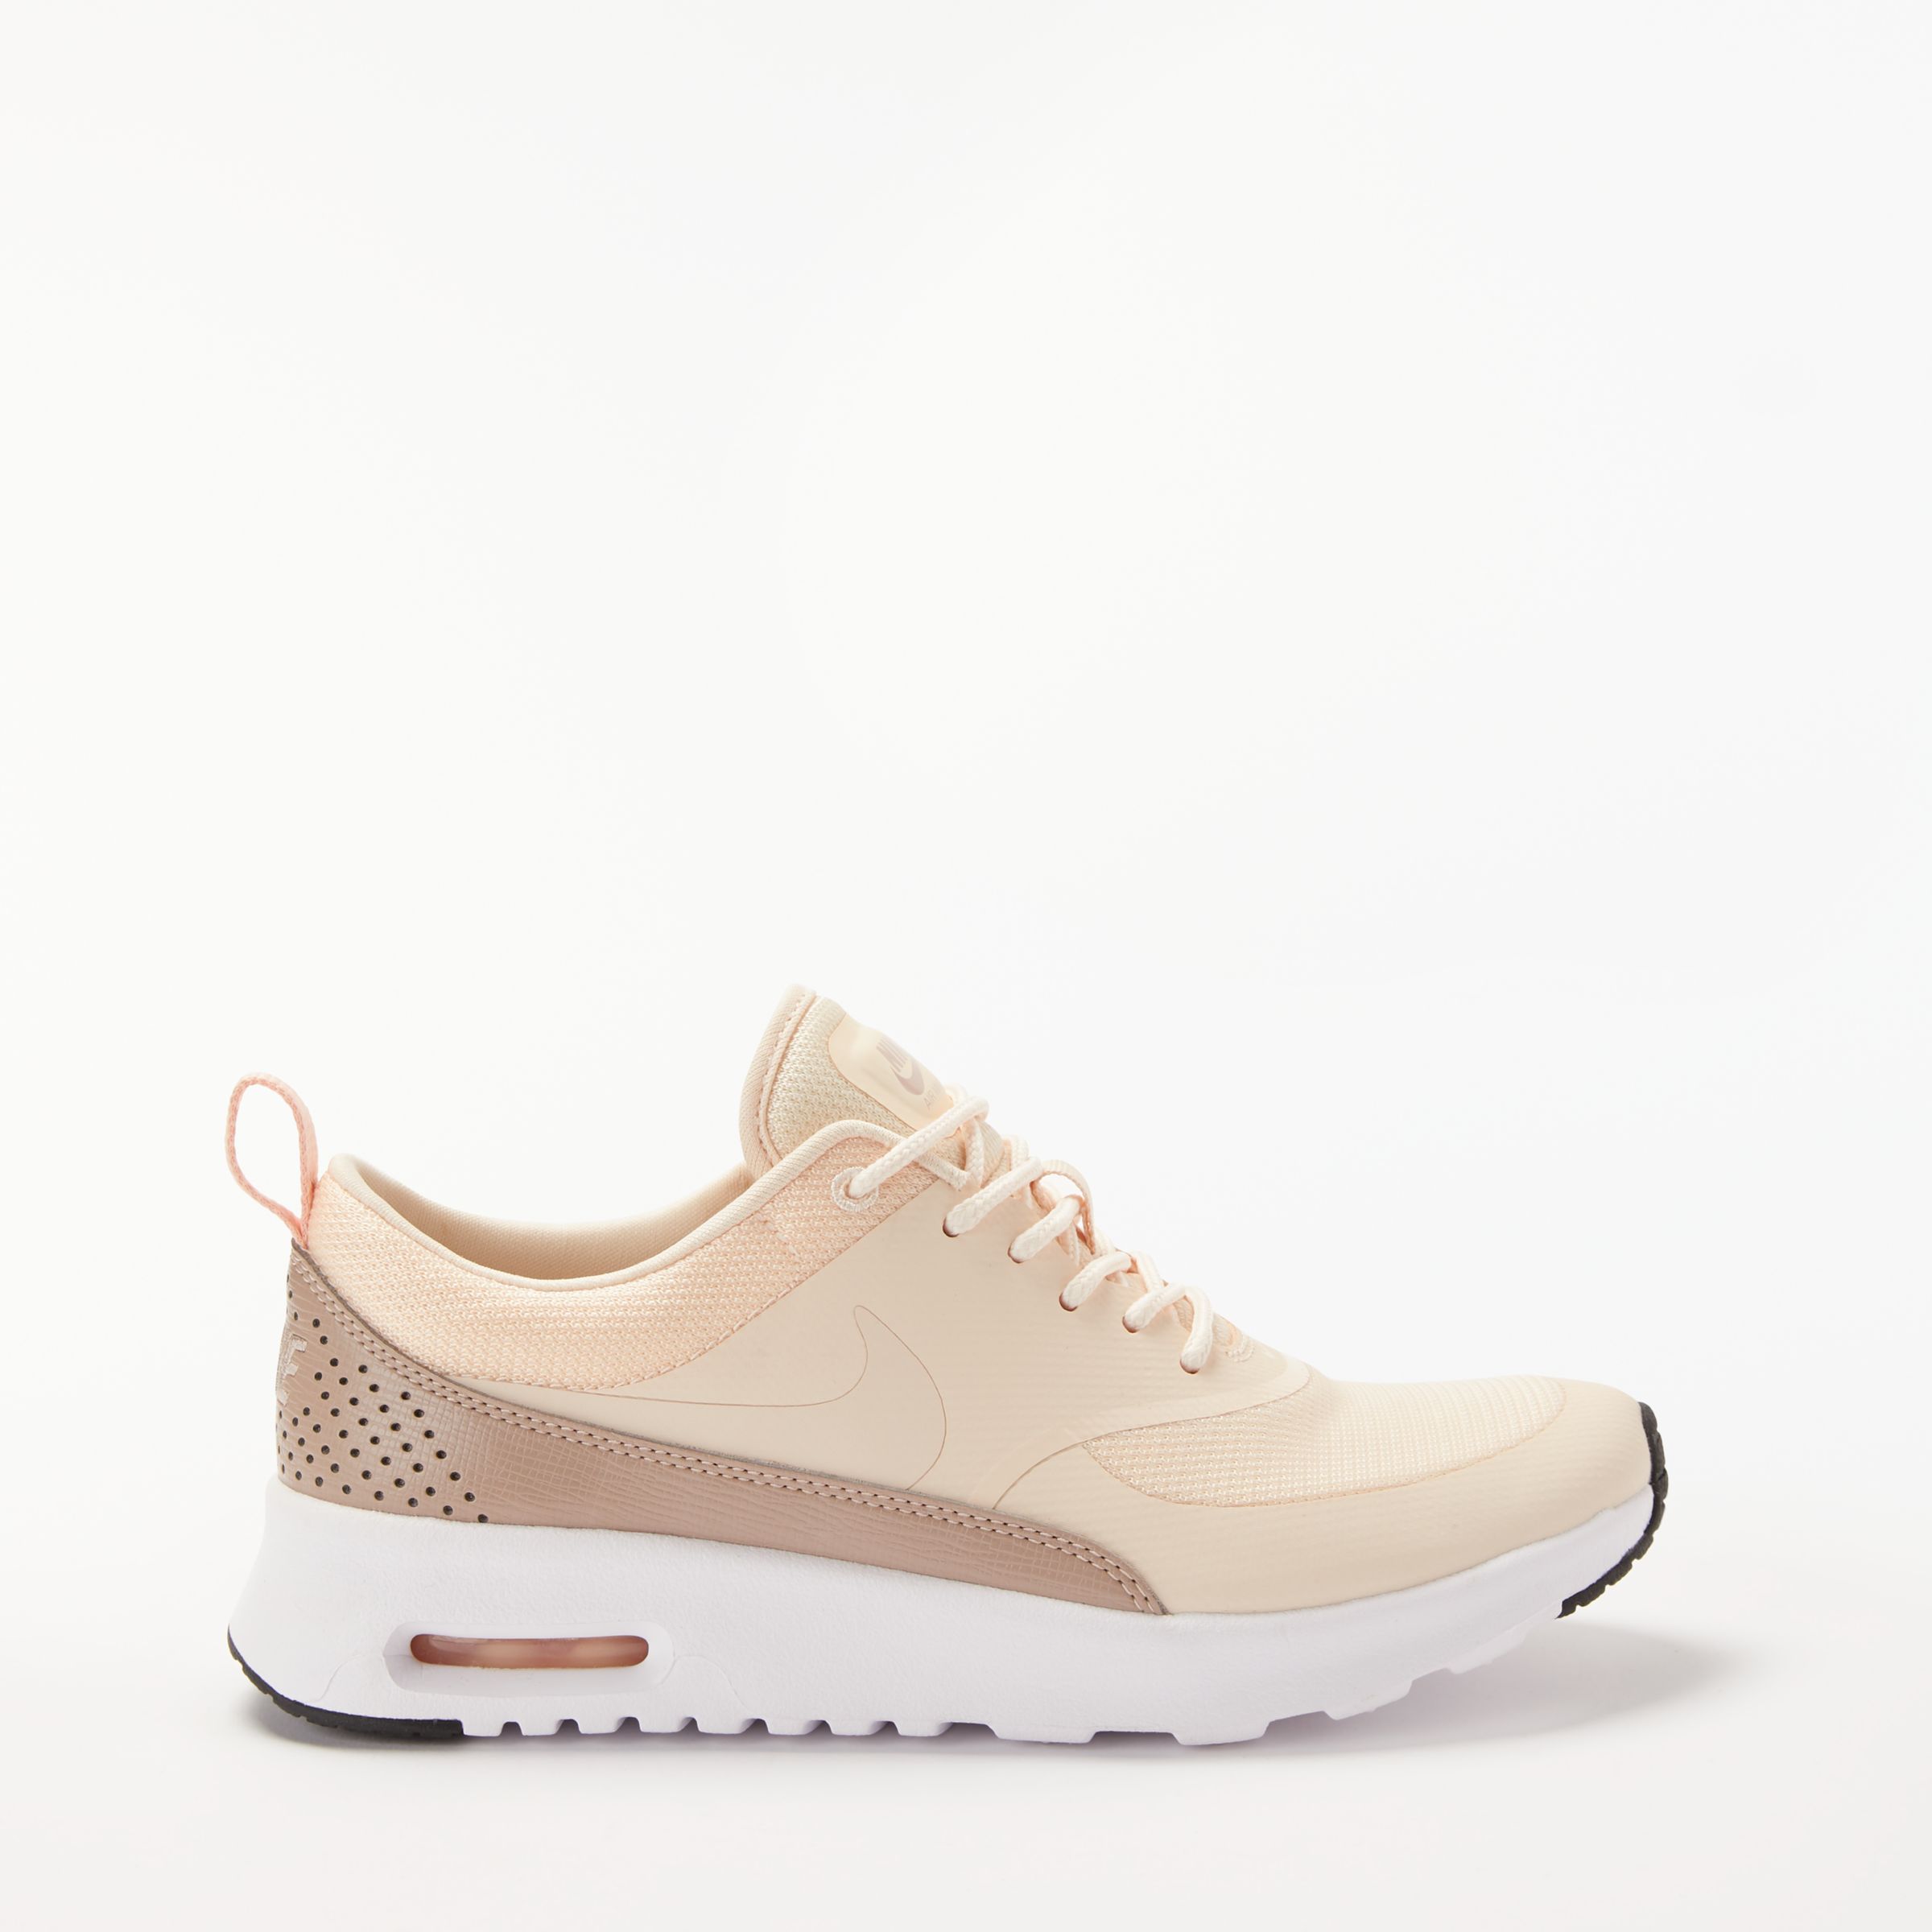 Nike Air Max Thea Women's Trainers 